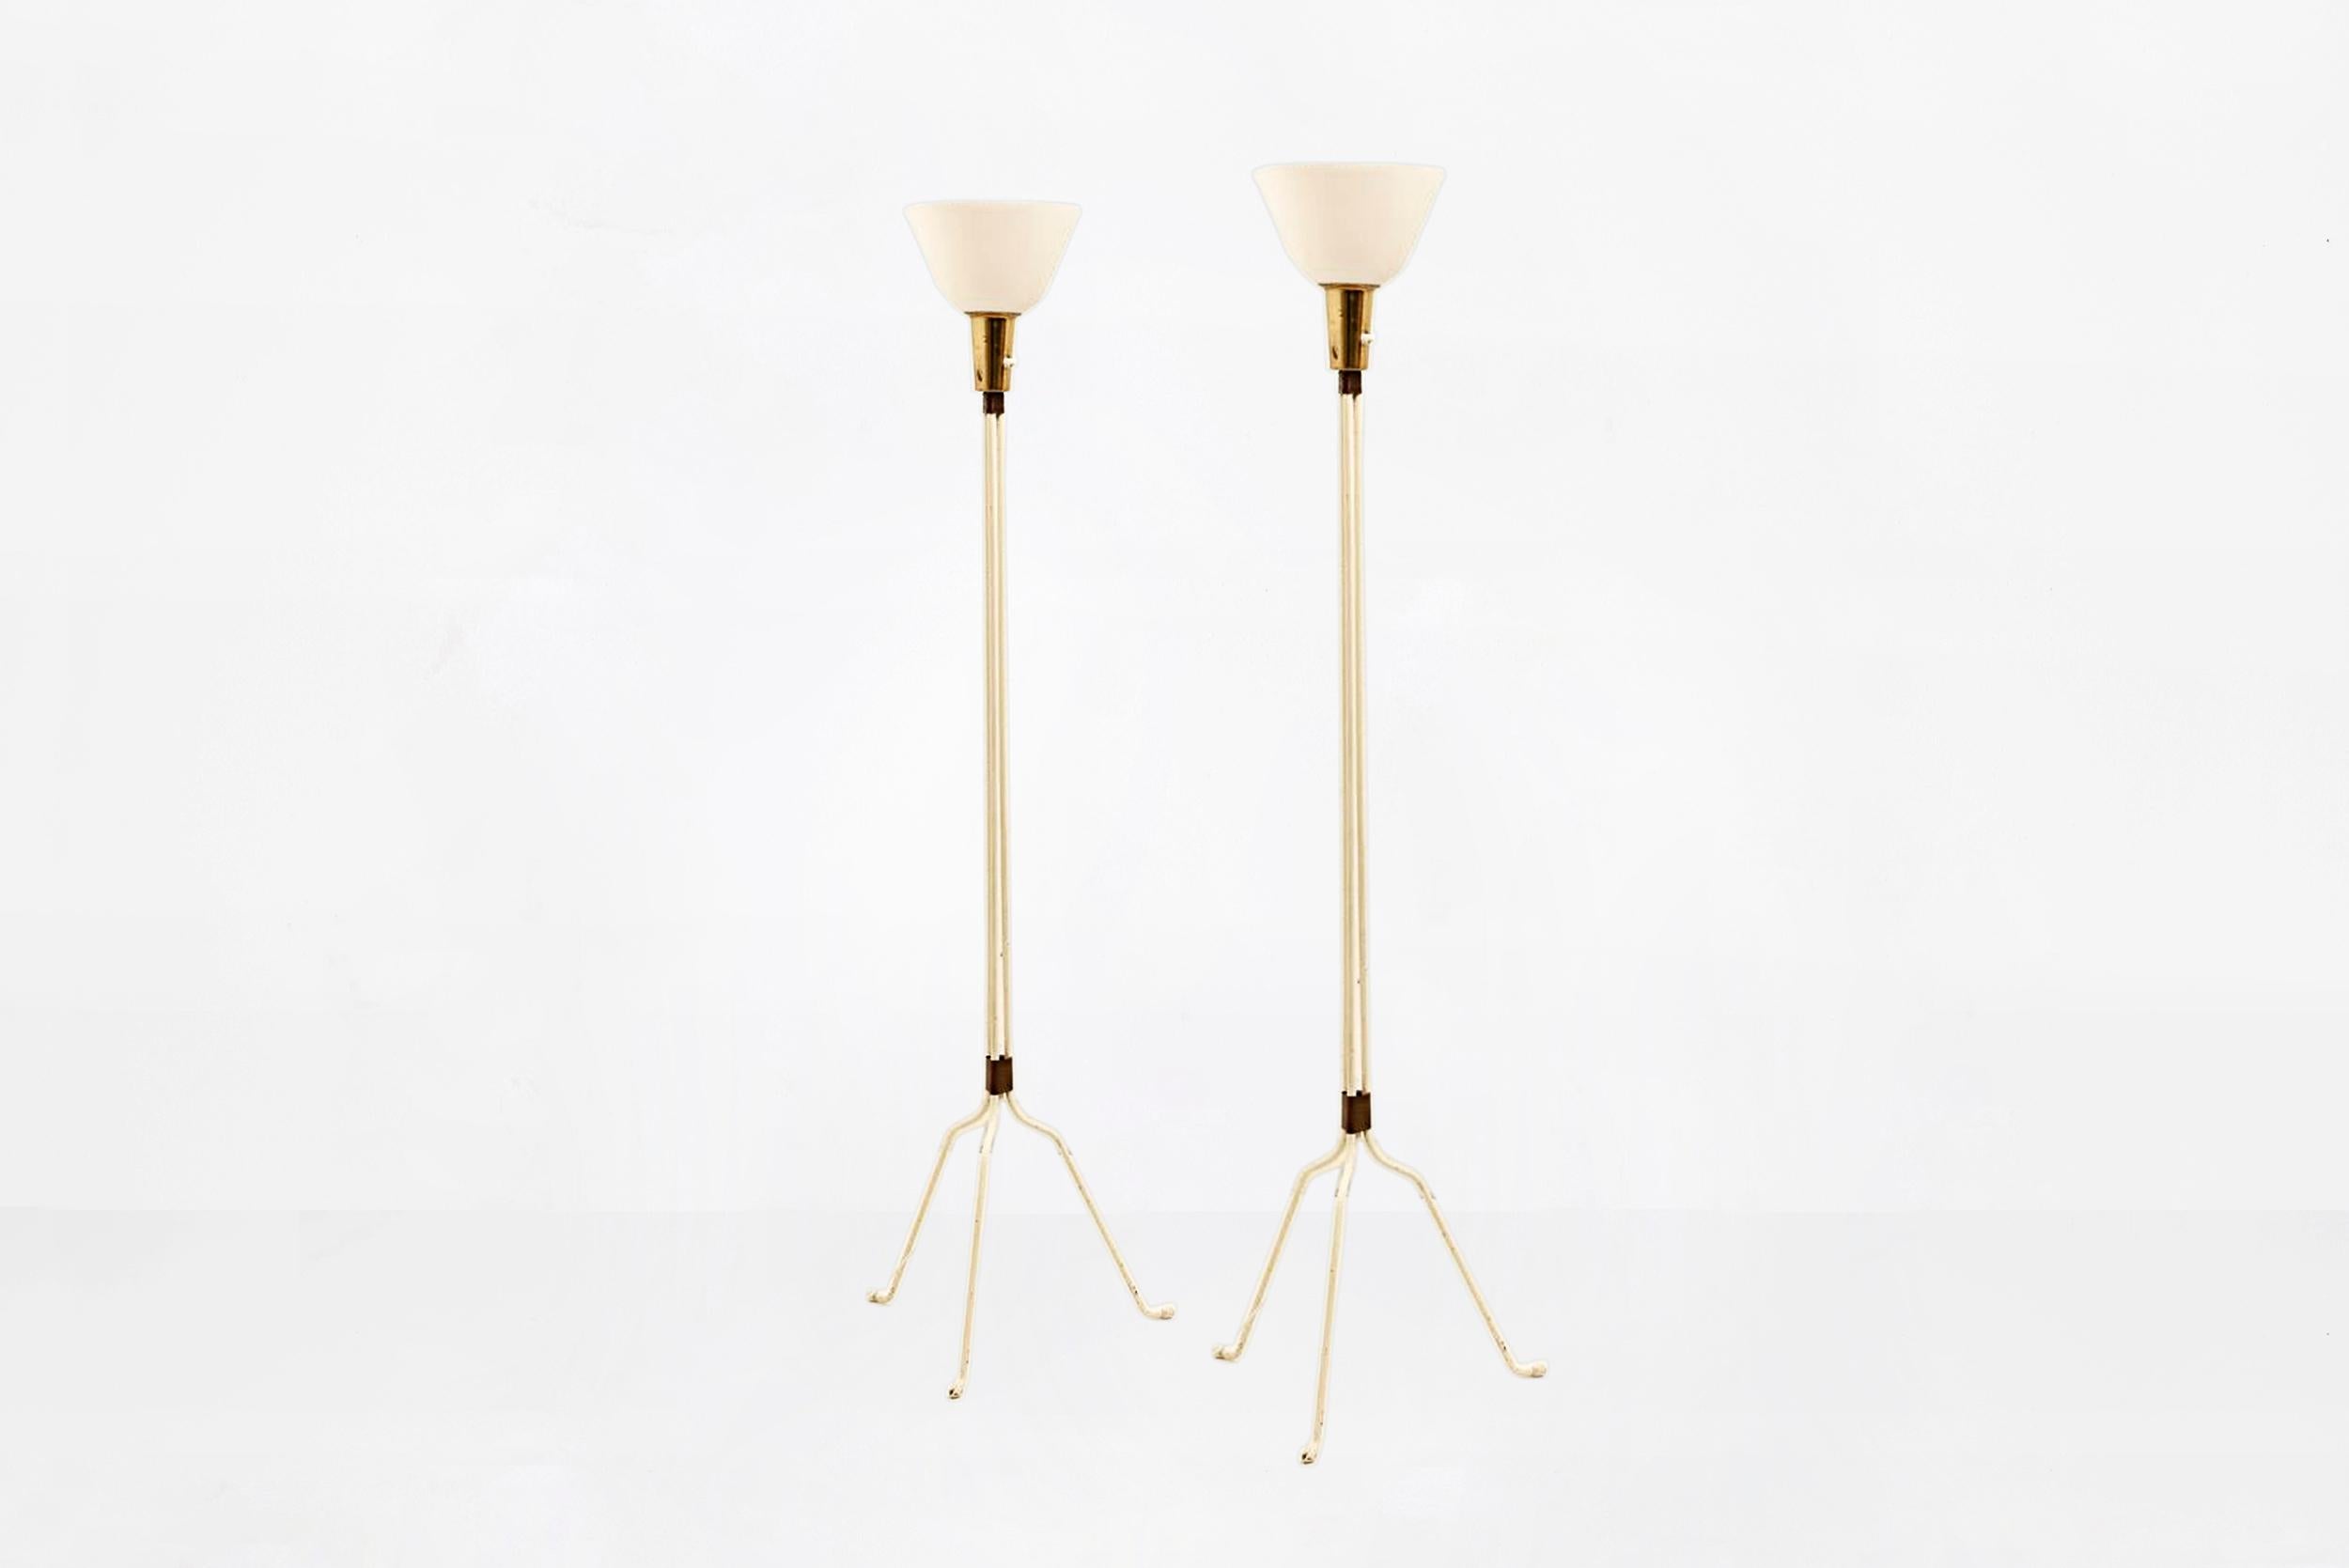 Lisa Johansson-Pape
Pair of floor lamps
Manufactured by Orno
Finland, 1947
Painted steel, brass and acrylic shade
From the archives of Side Gallery, Barcelona 

Measurements
57.45 cm diameter x 146 cm height
22.61 in diameter x 57.48 in